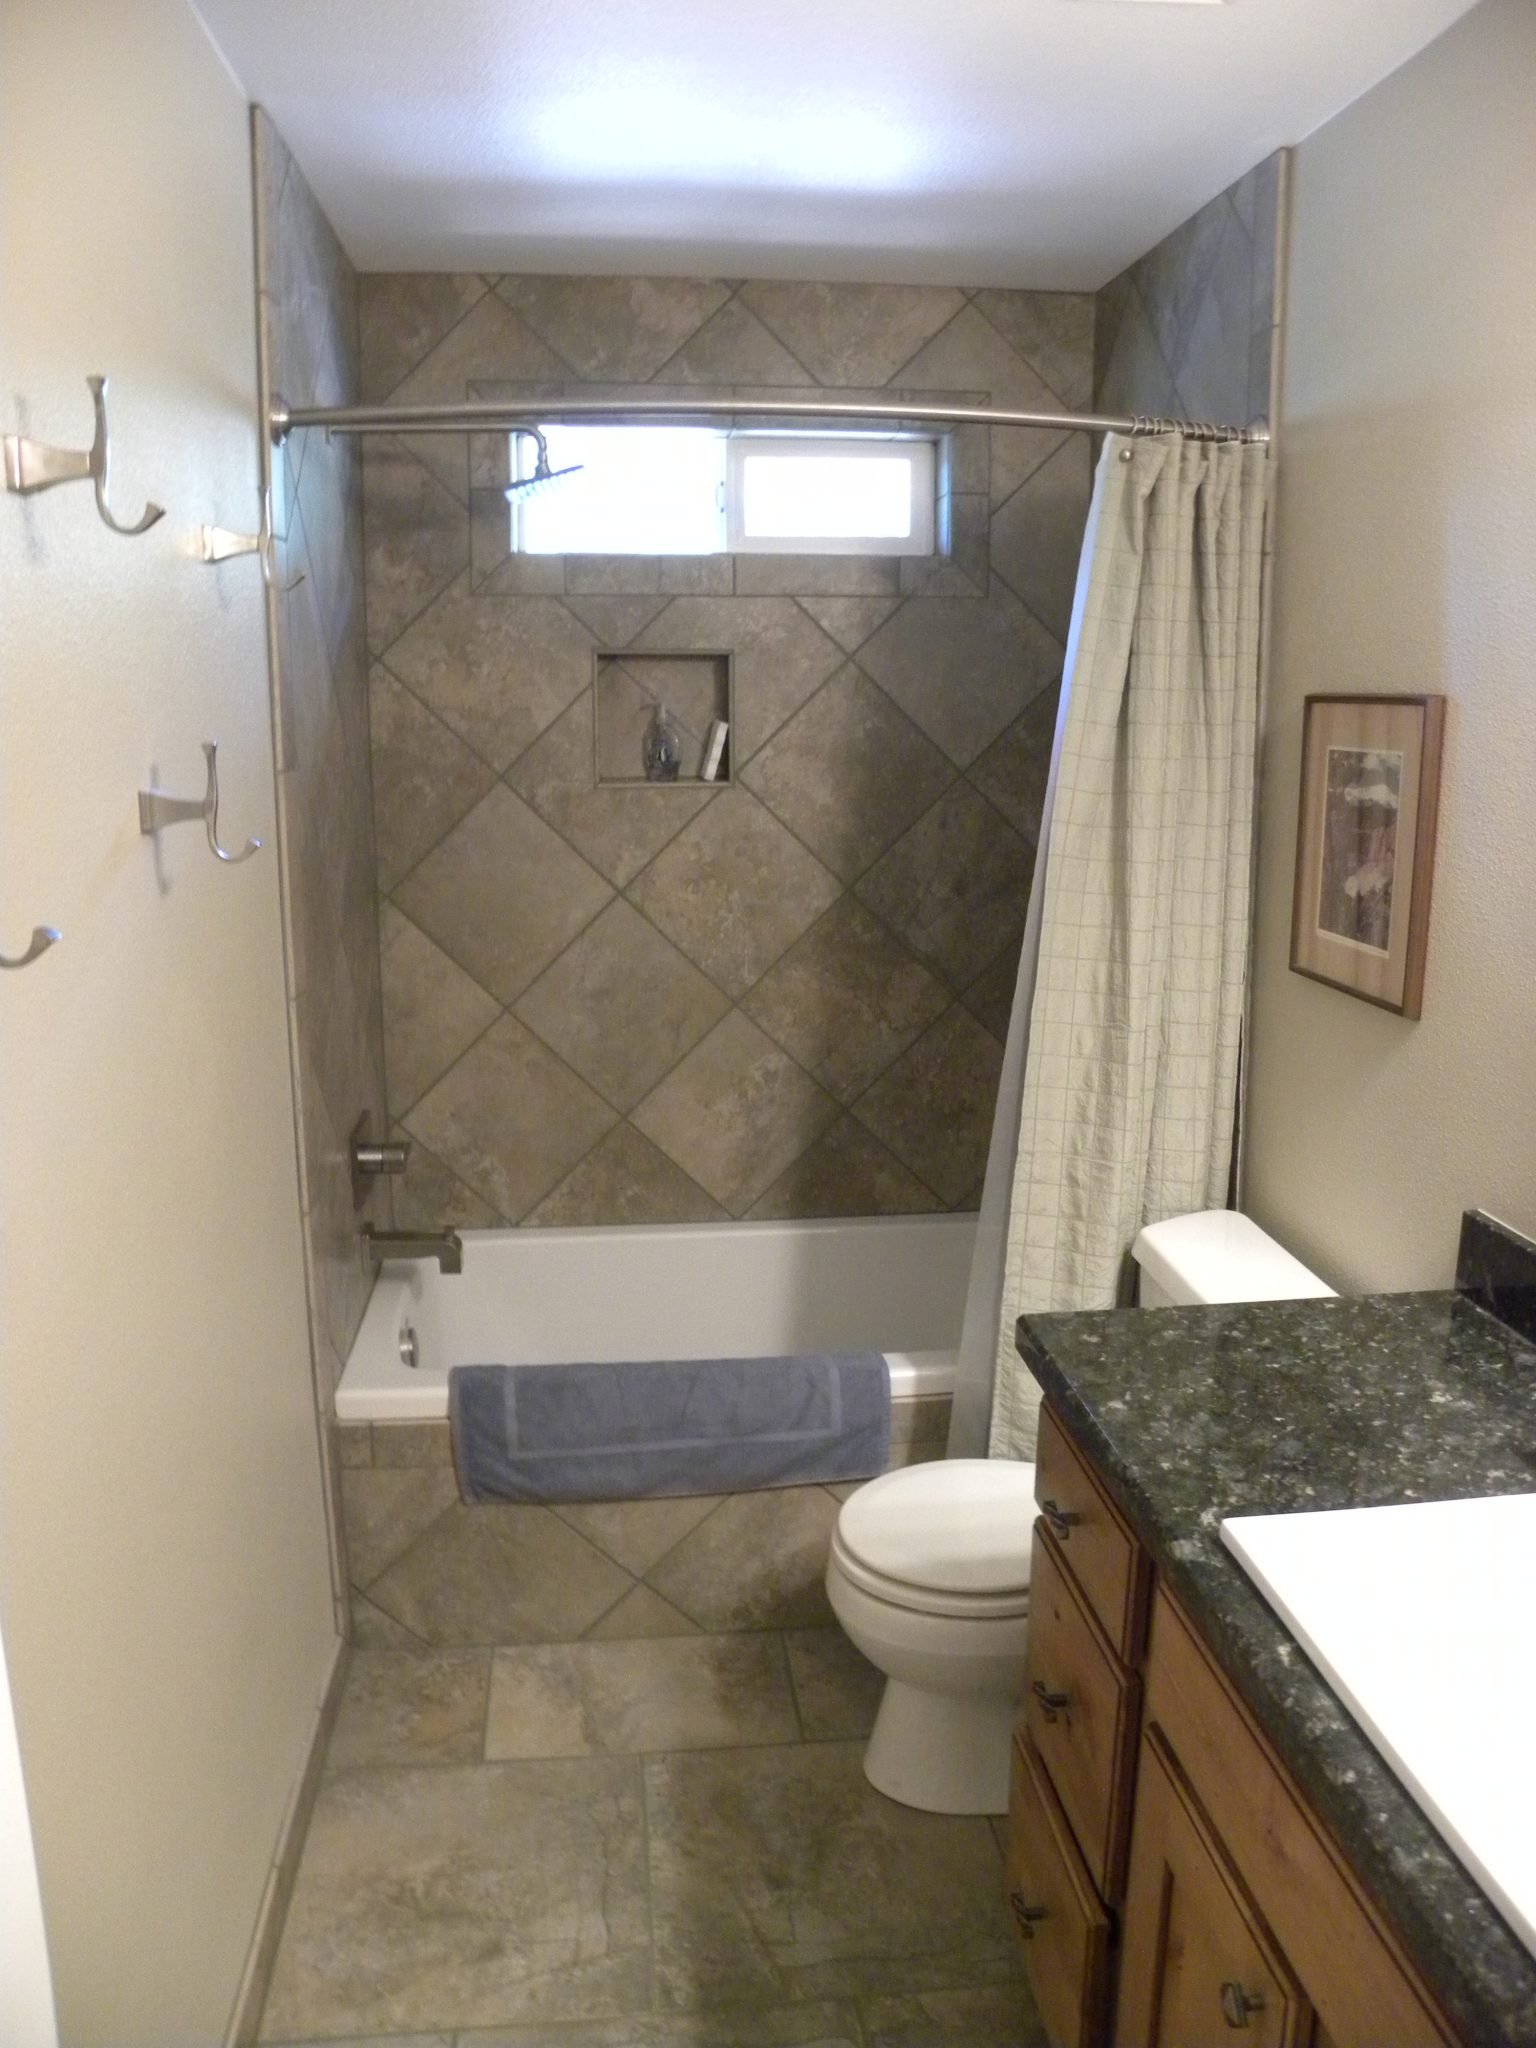 Interior shot of a custom designed bathroom with gray tiling and granite countertops